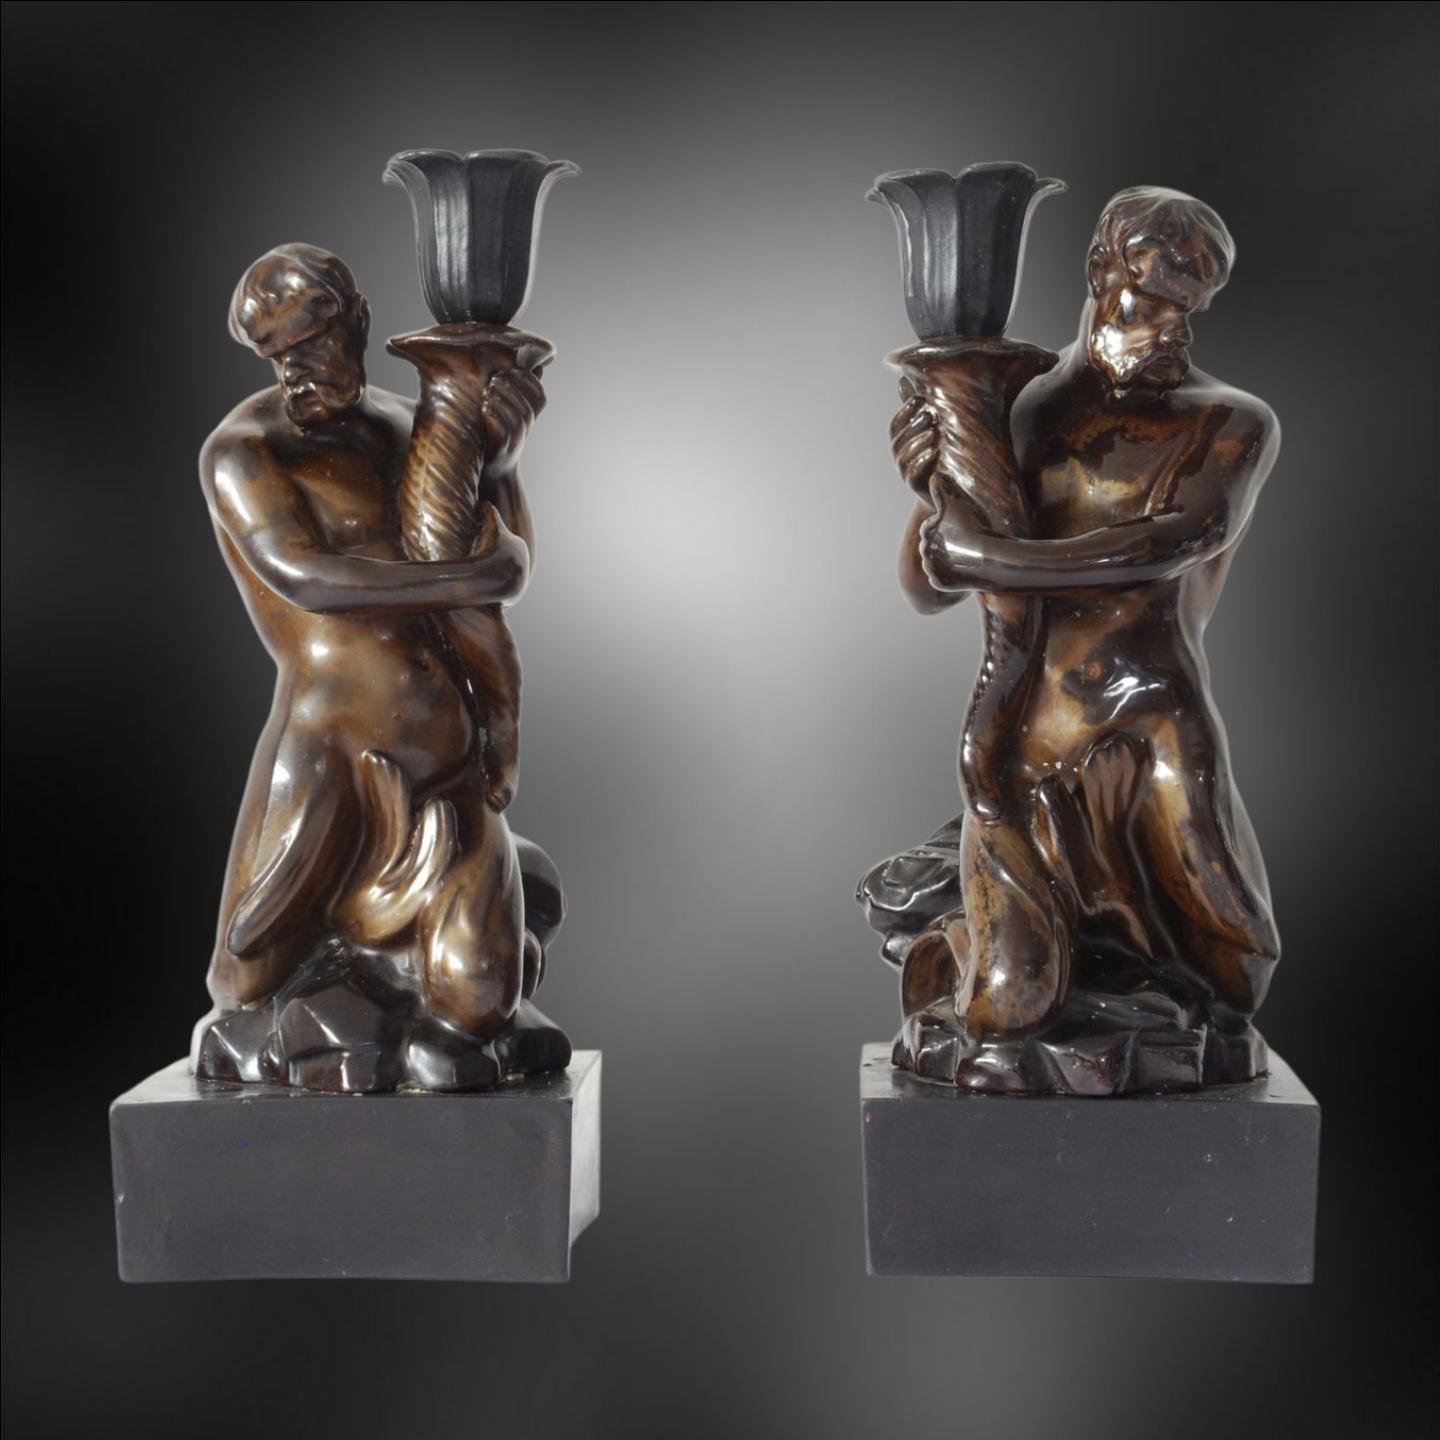 An exceptionally rare pair of Triton candlesticks, in black basalt with gold lustre. The design is copied from Wedgwood, who took it from Sir William Chambers' study of Bernini's Triton Fountain, in the Piazza Barbarini.

An unscrupulous dealer (not